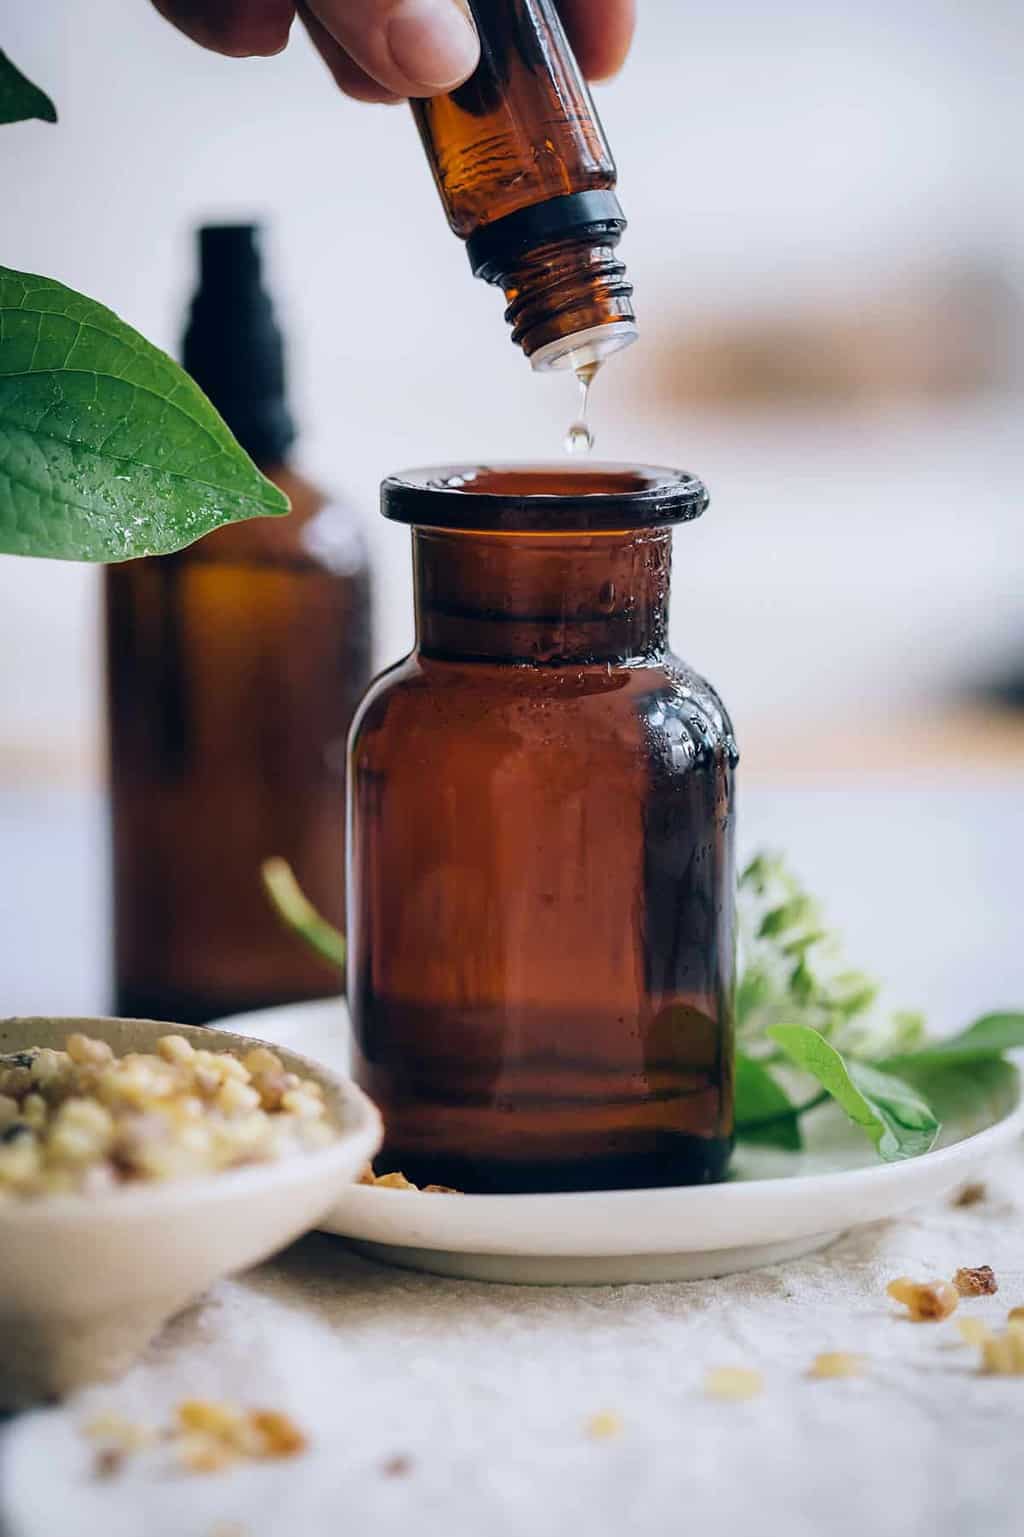 Frankincense Essential Oil Benefits, Uses, and Recipes - Simply